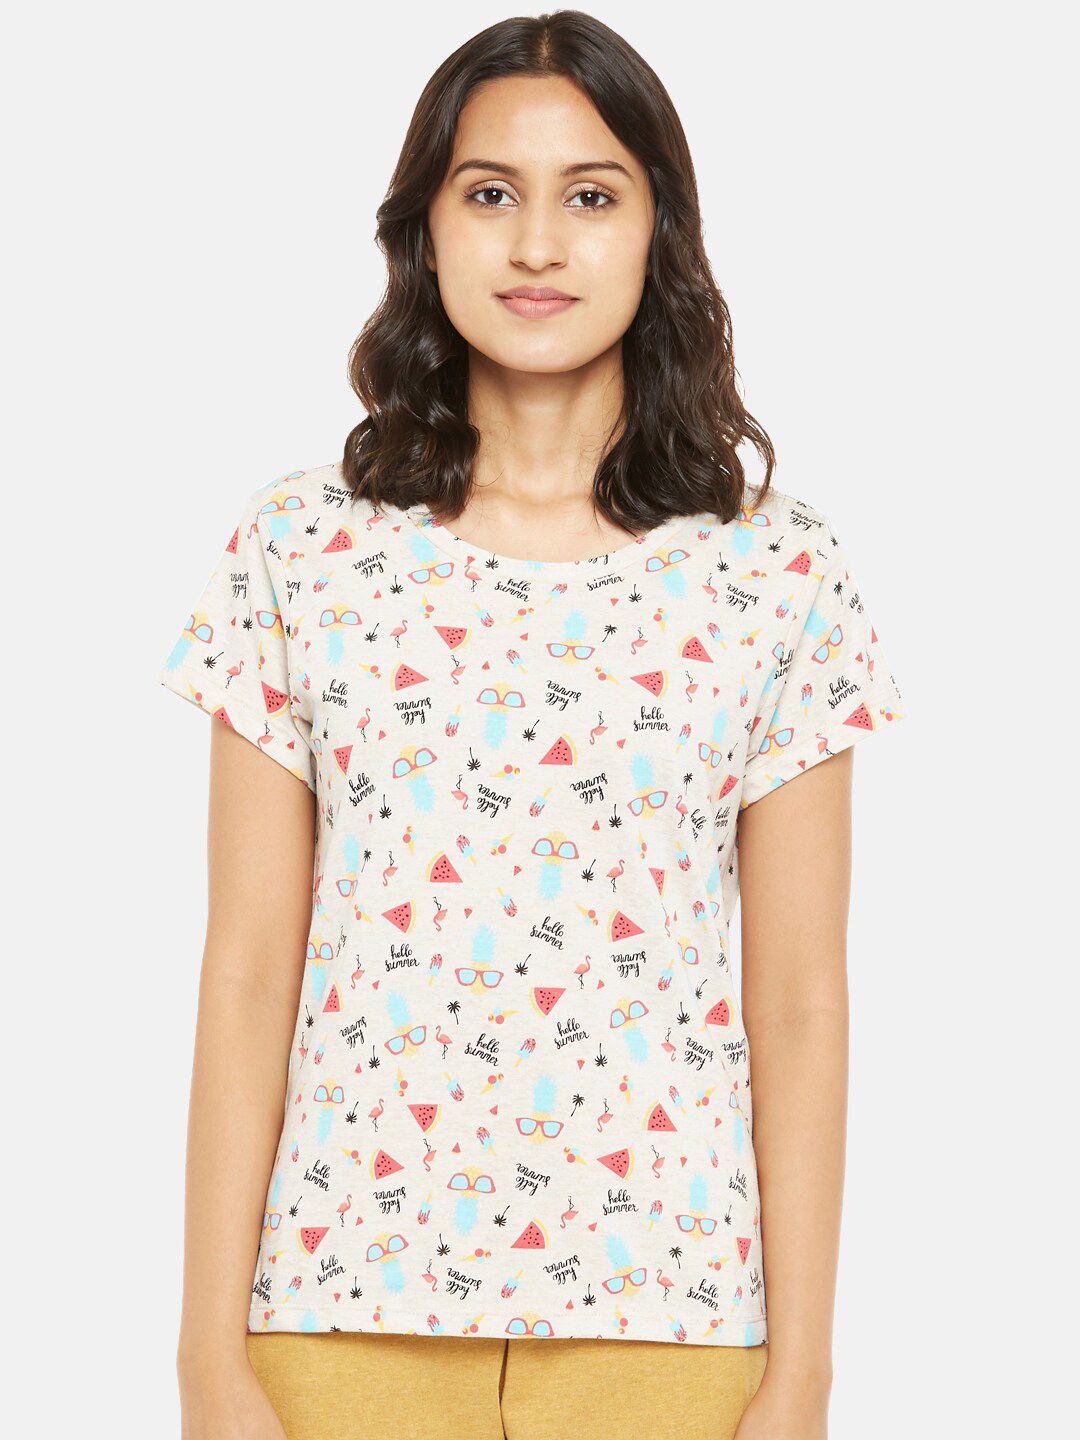 Dreamz by Pantaloons Cream-Coloured & Red Printed Lounge tshirt Price in India